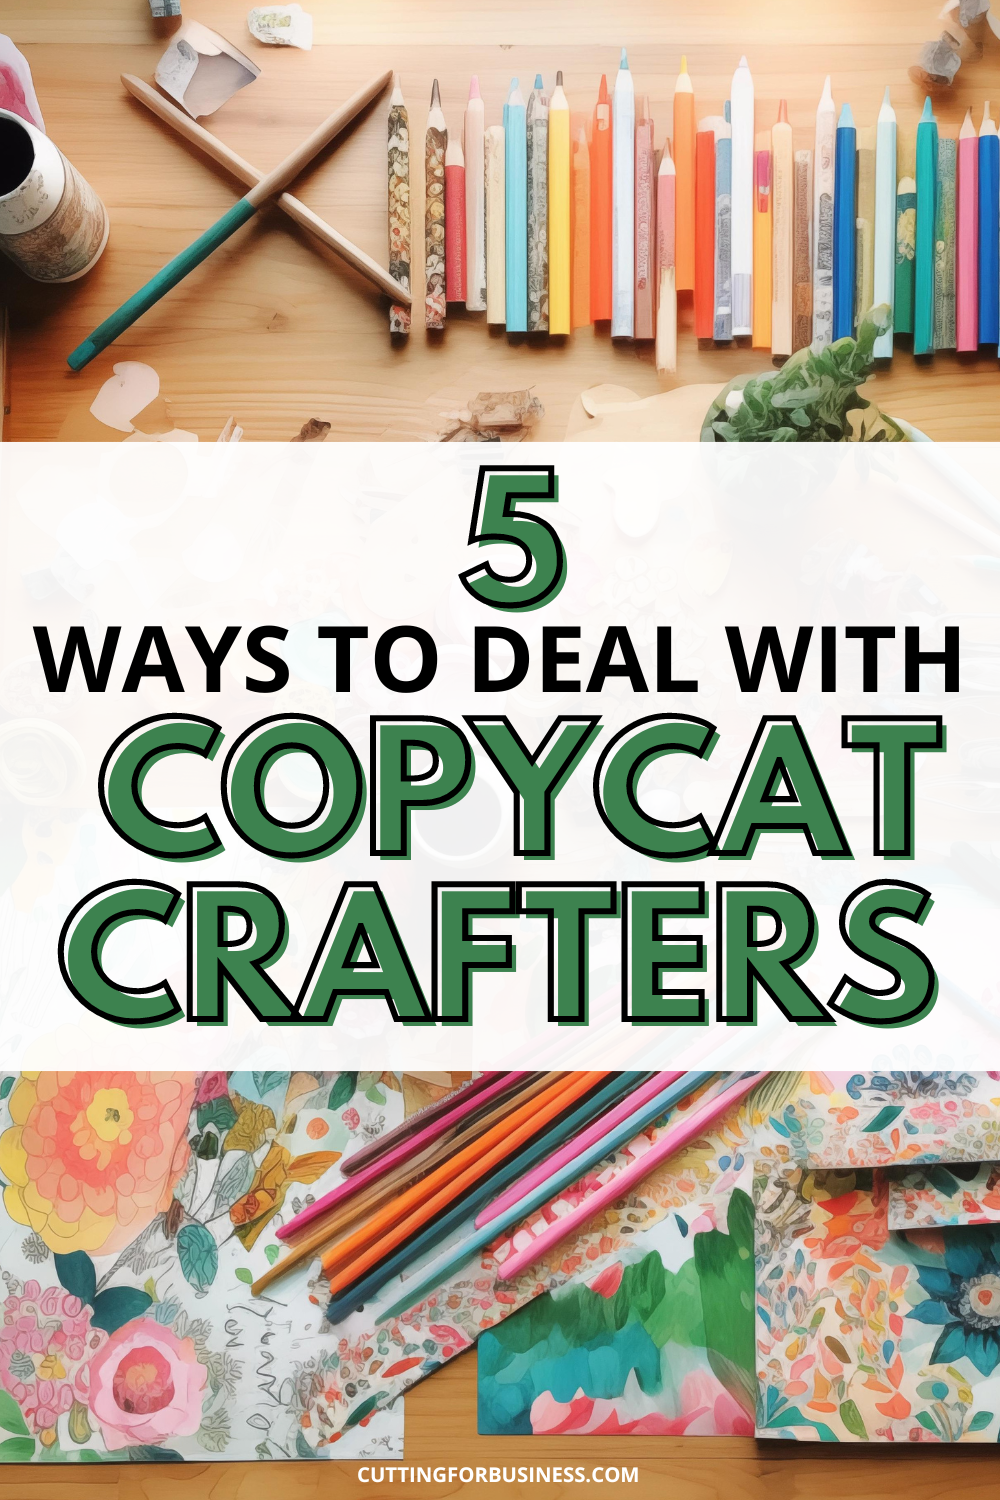 5 Ways to Deal with Copycats in Your Craft Business - cuttingforbusiness.com